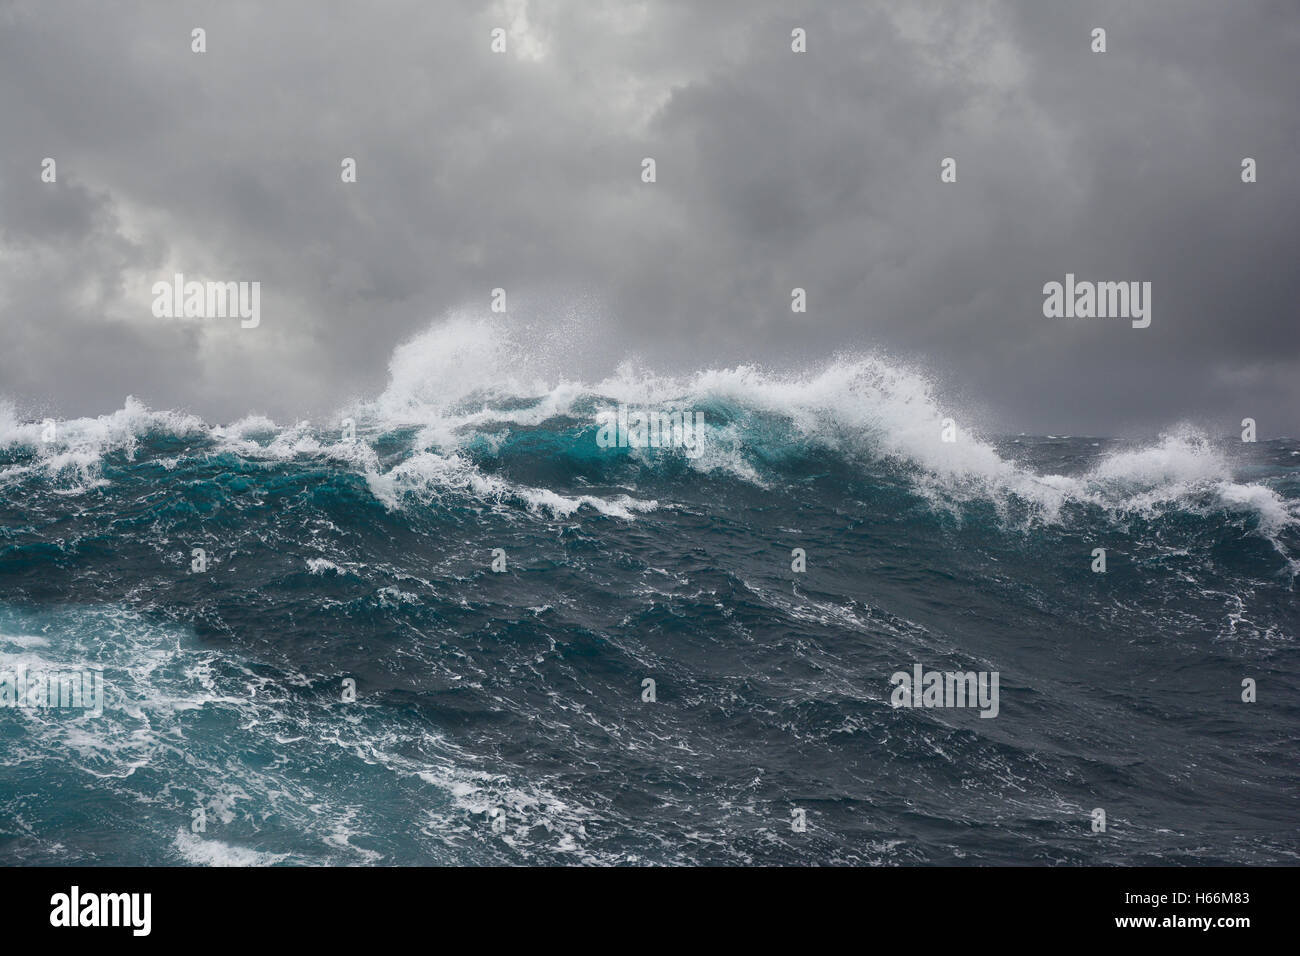 Sea wave in north part of Atlantic ocean during storm Stock Photo